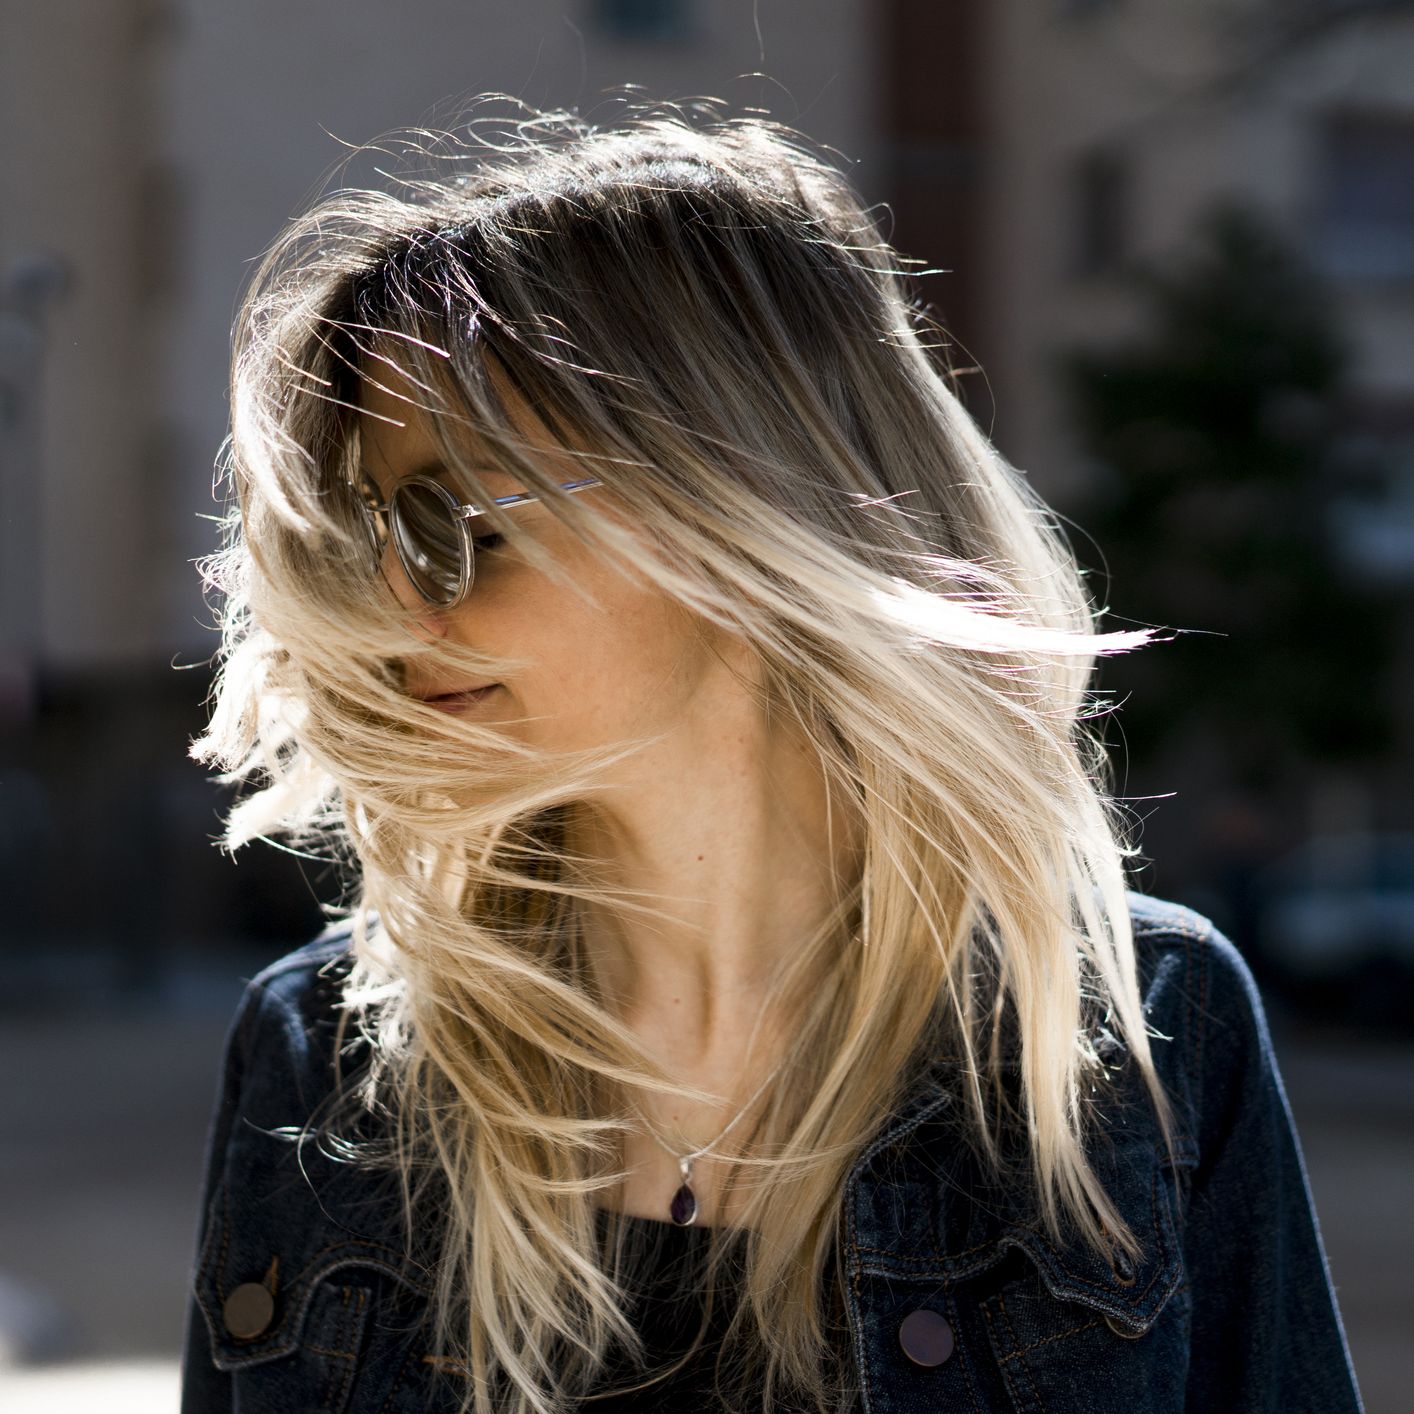 This is how to have a good hair day every day